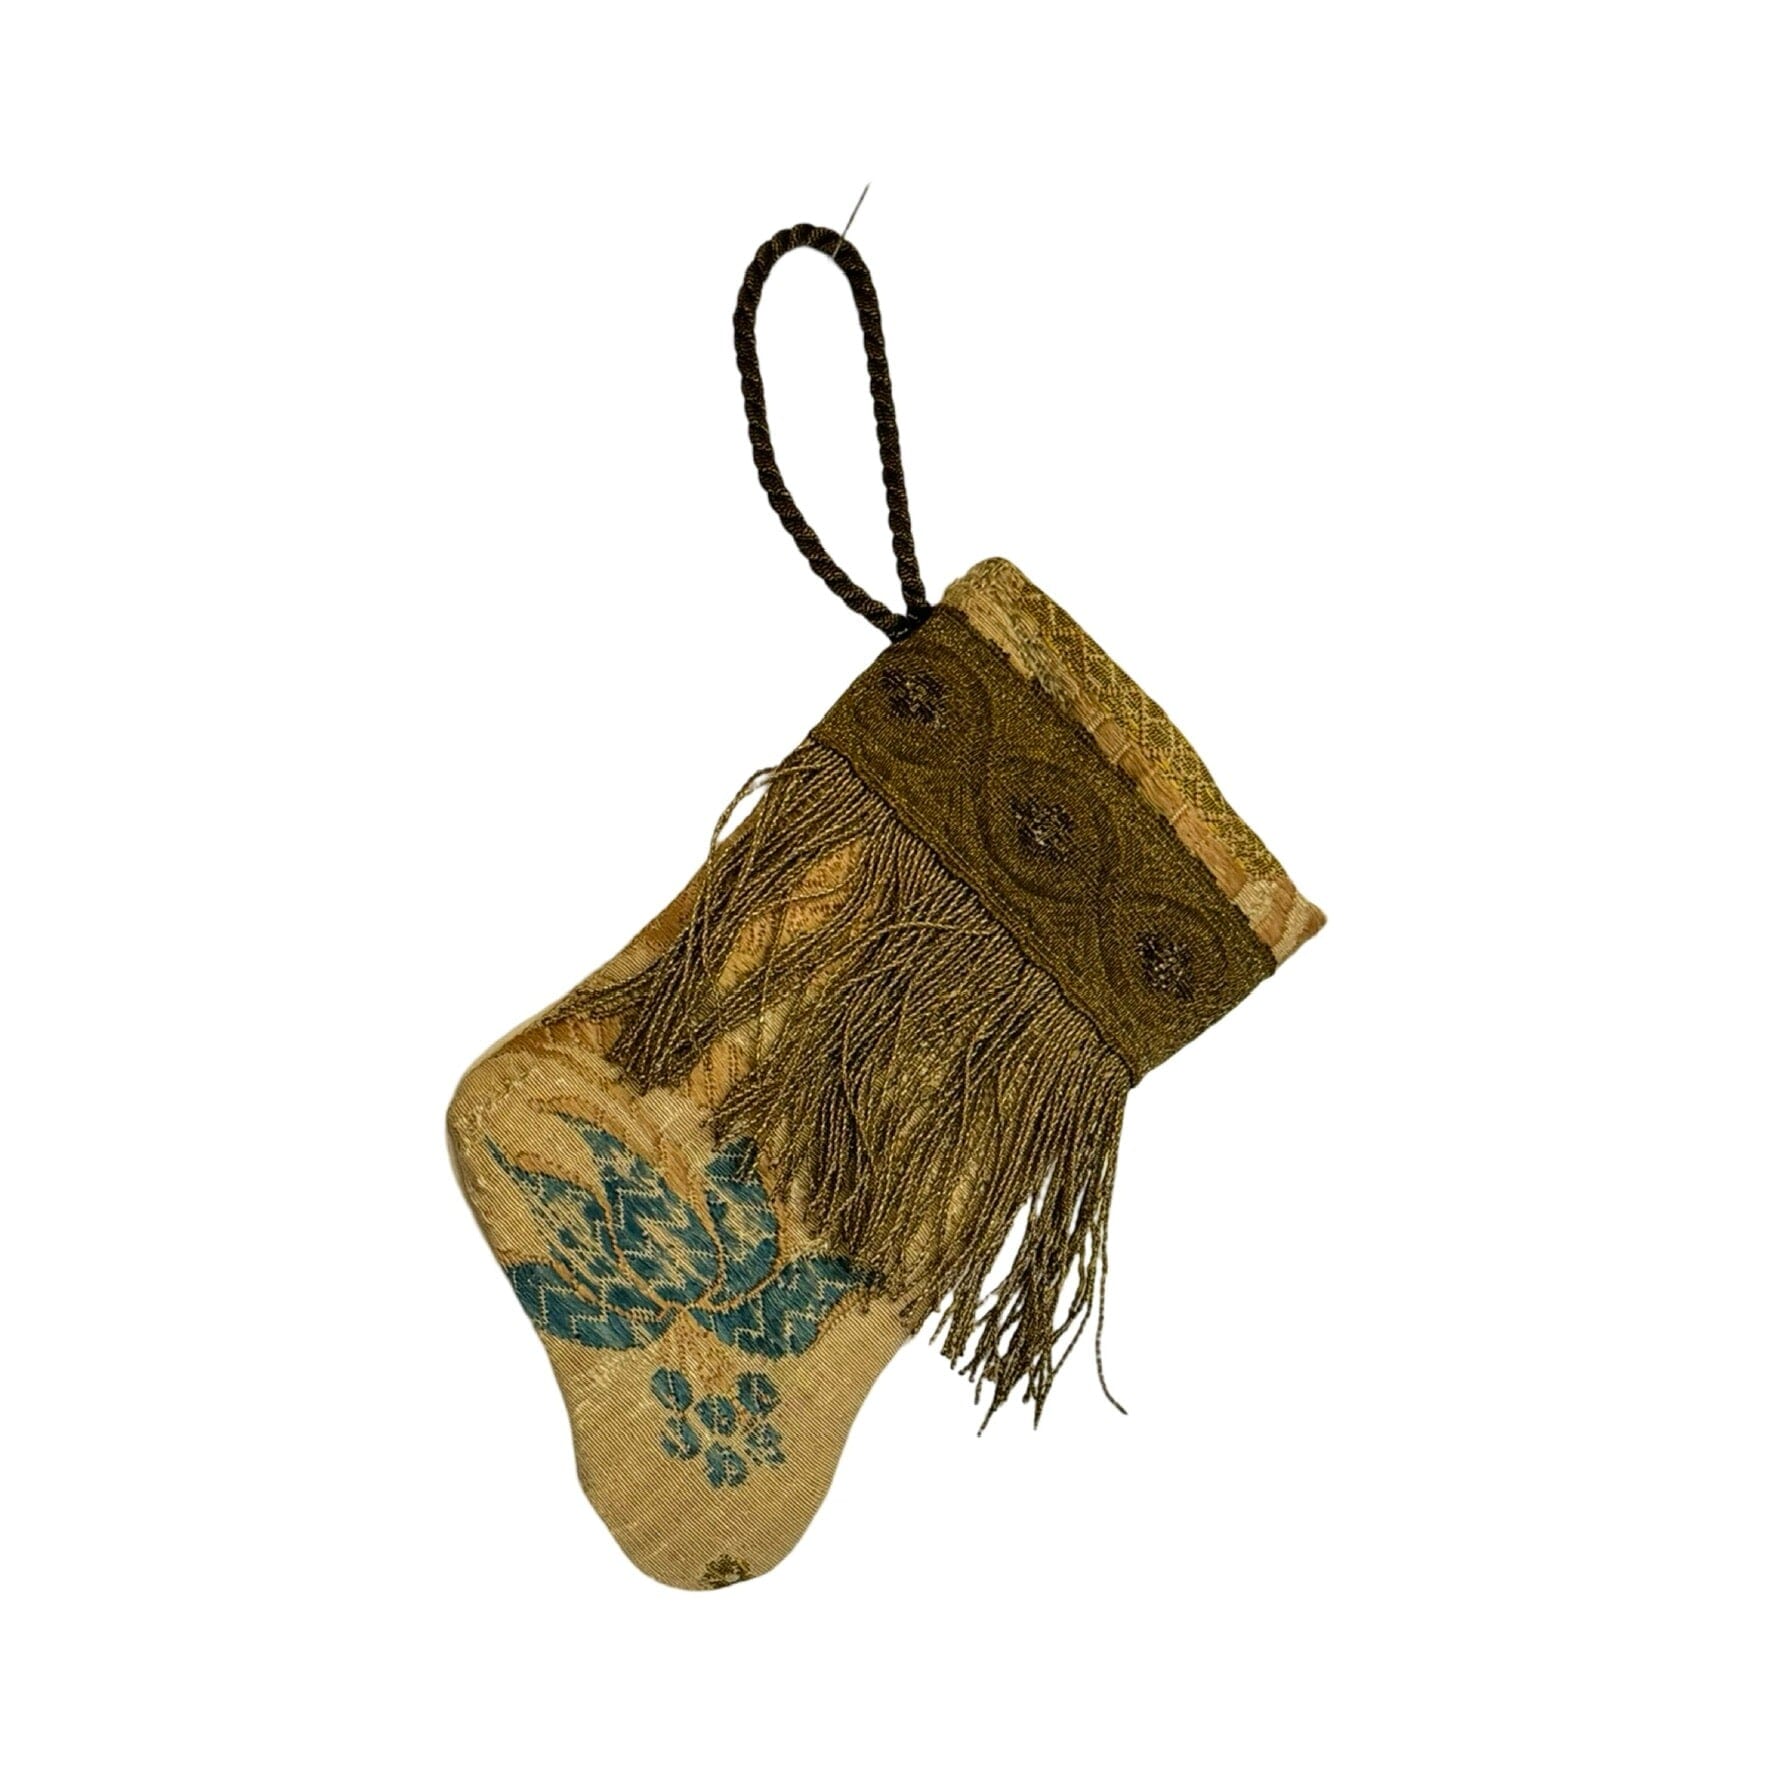 Handmade Mini Stocking Made From Vintage Fabric and Trims- Champagne Embroidery Ornament B. Viz Design A 